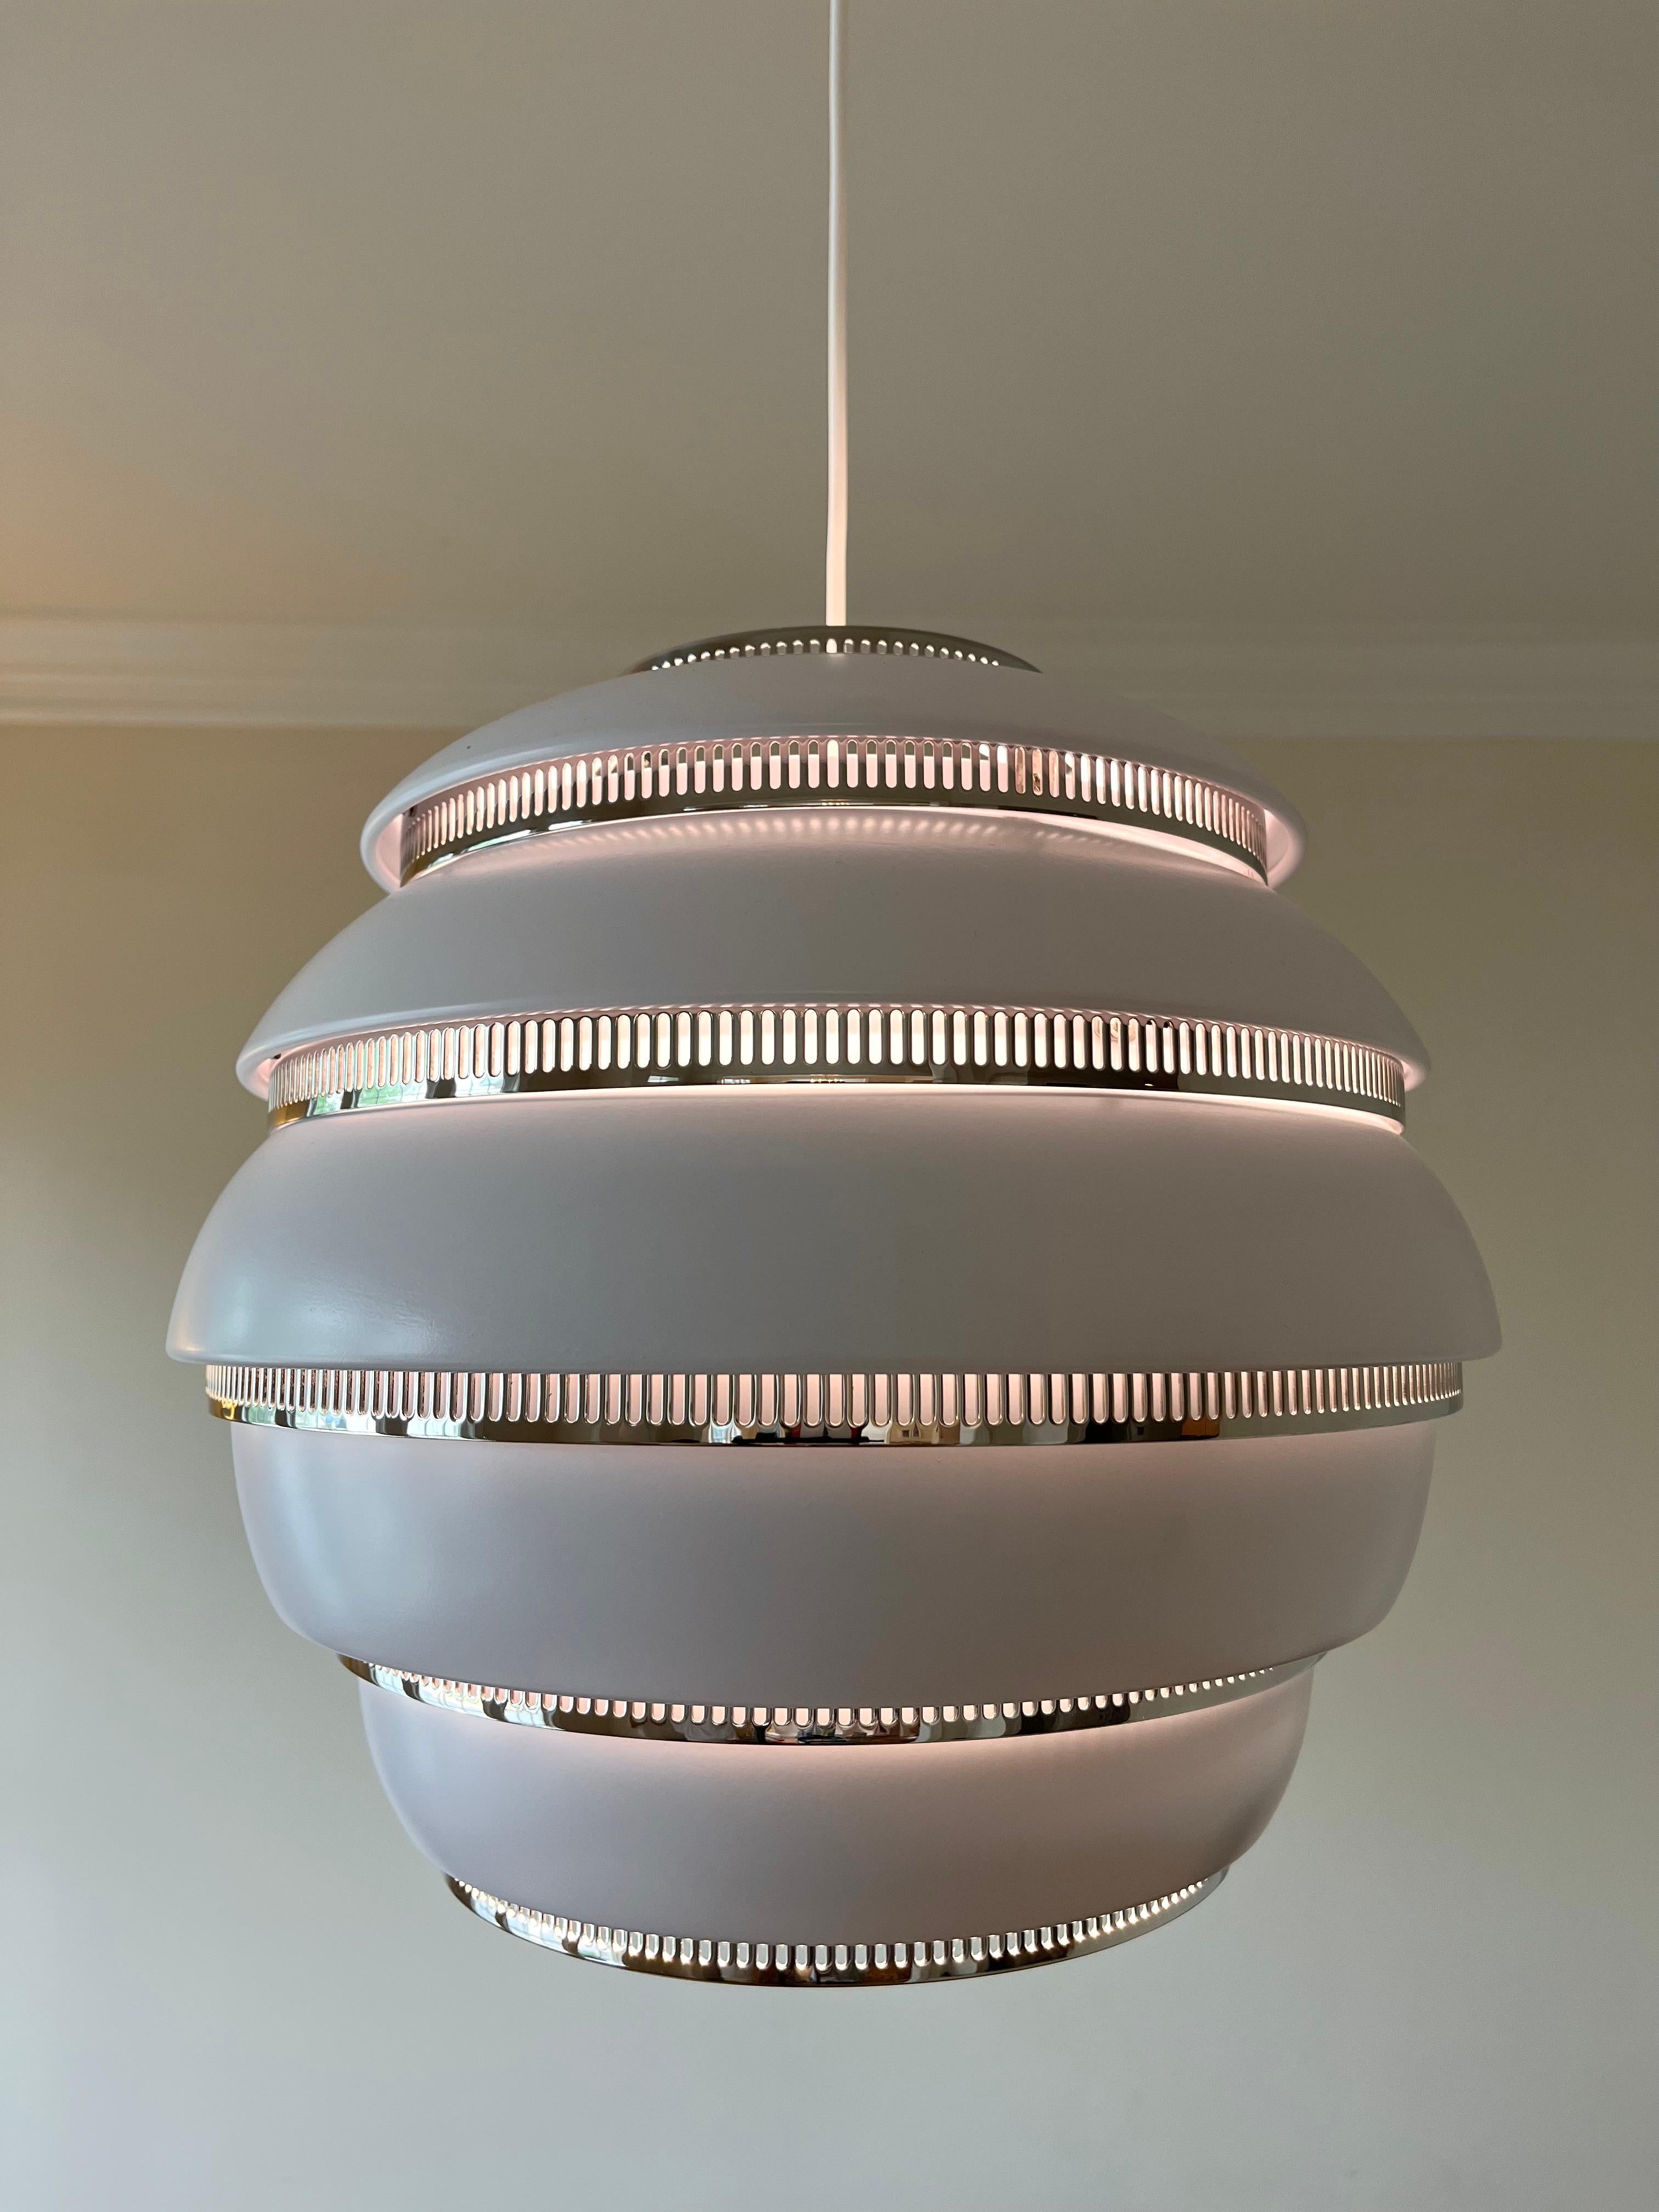 The A331, nicknamed “Beehive,” is one of Alvar Aalto’s most popular lighting designs. Suitable for homes and public spaces alike, “Beehive” creates a warm, diffuse light when switched on, a result of the ingenious design that features several rows